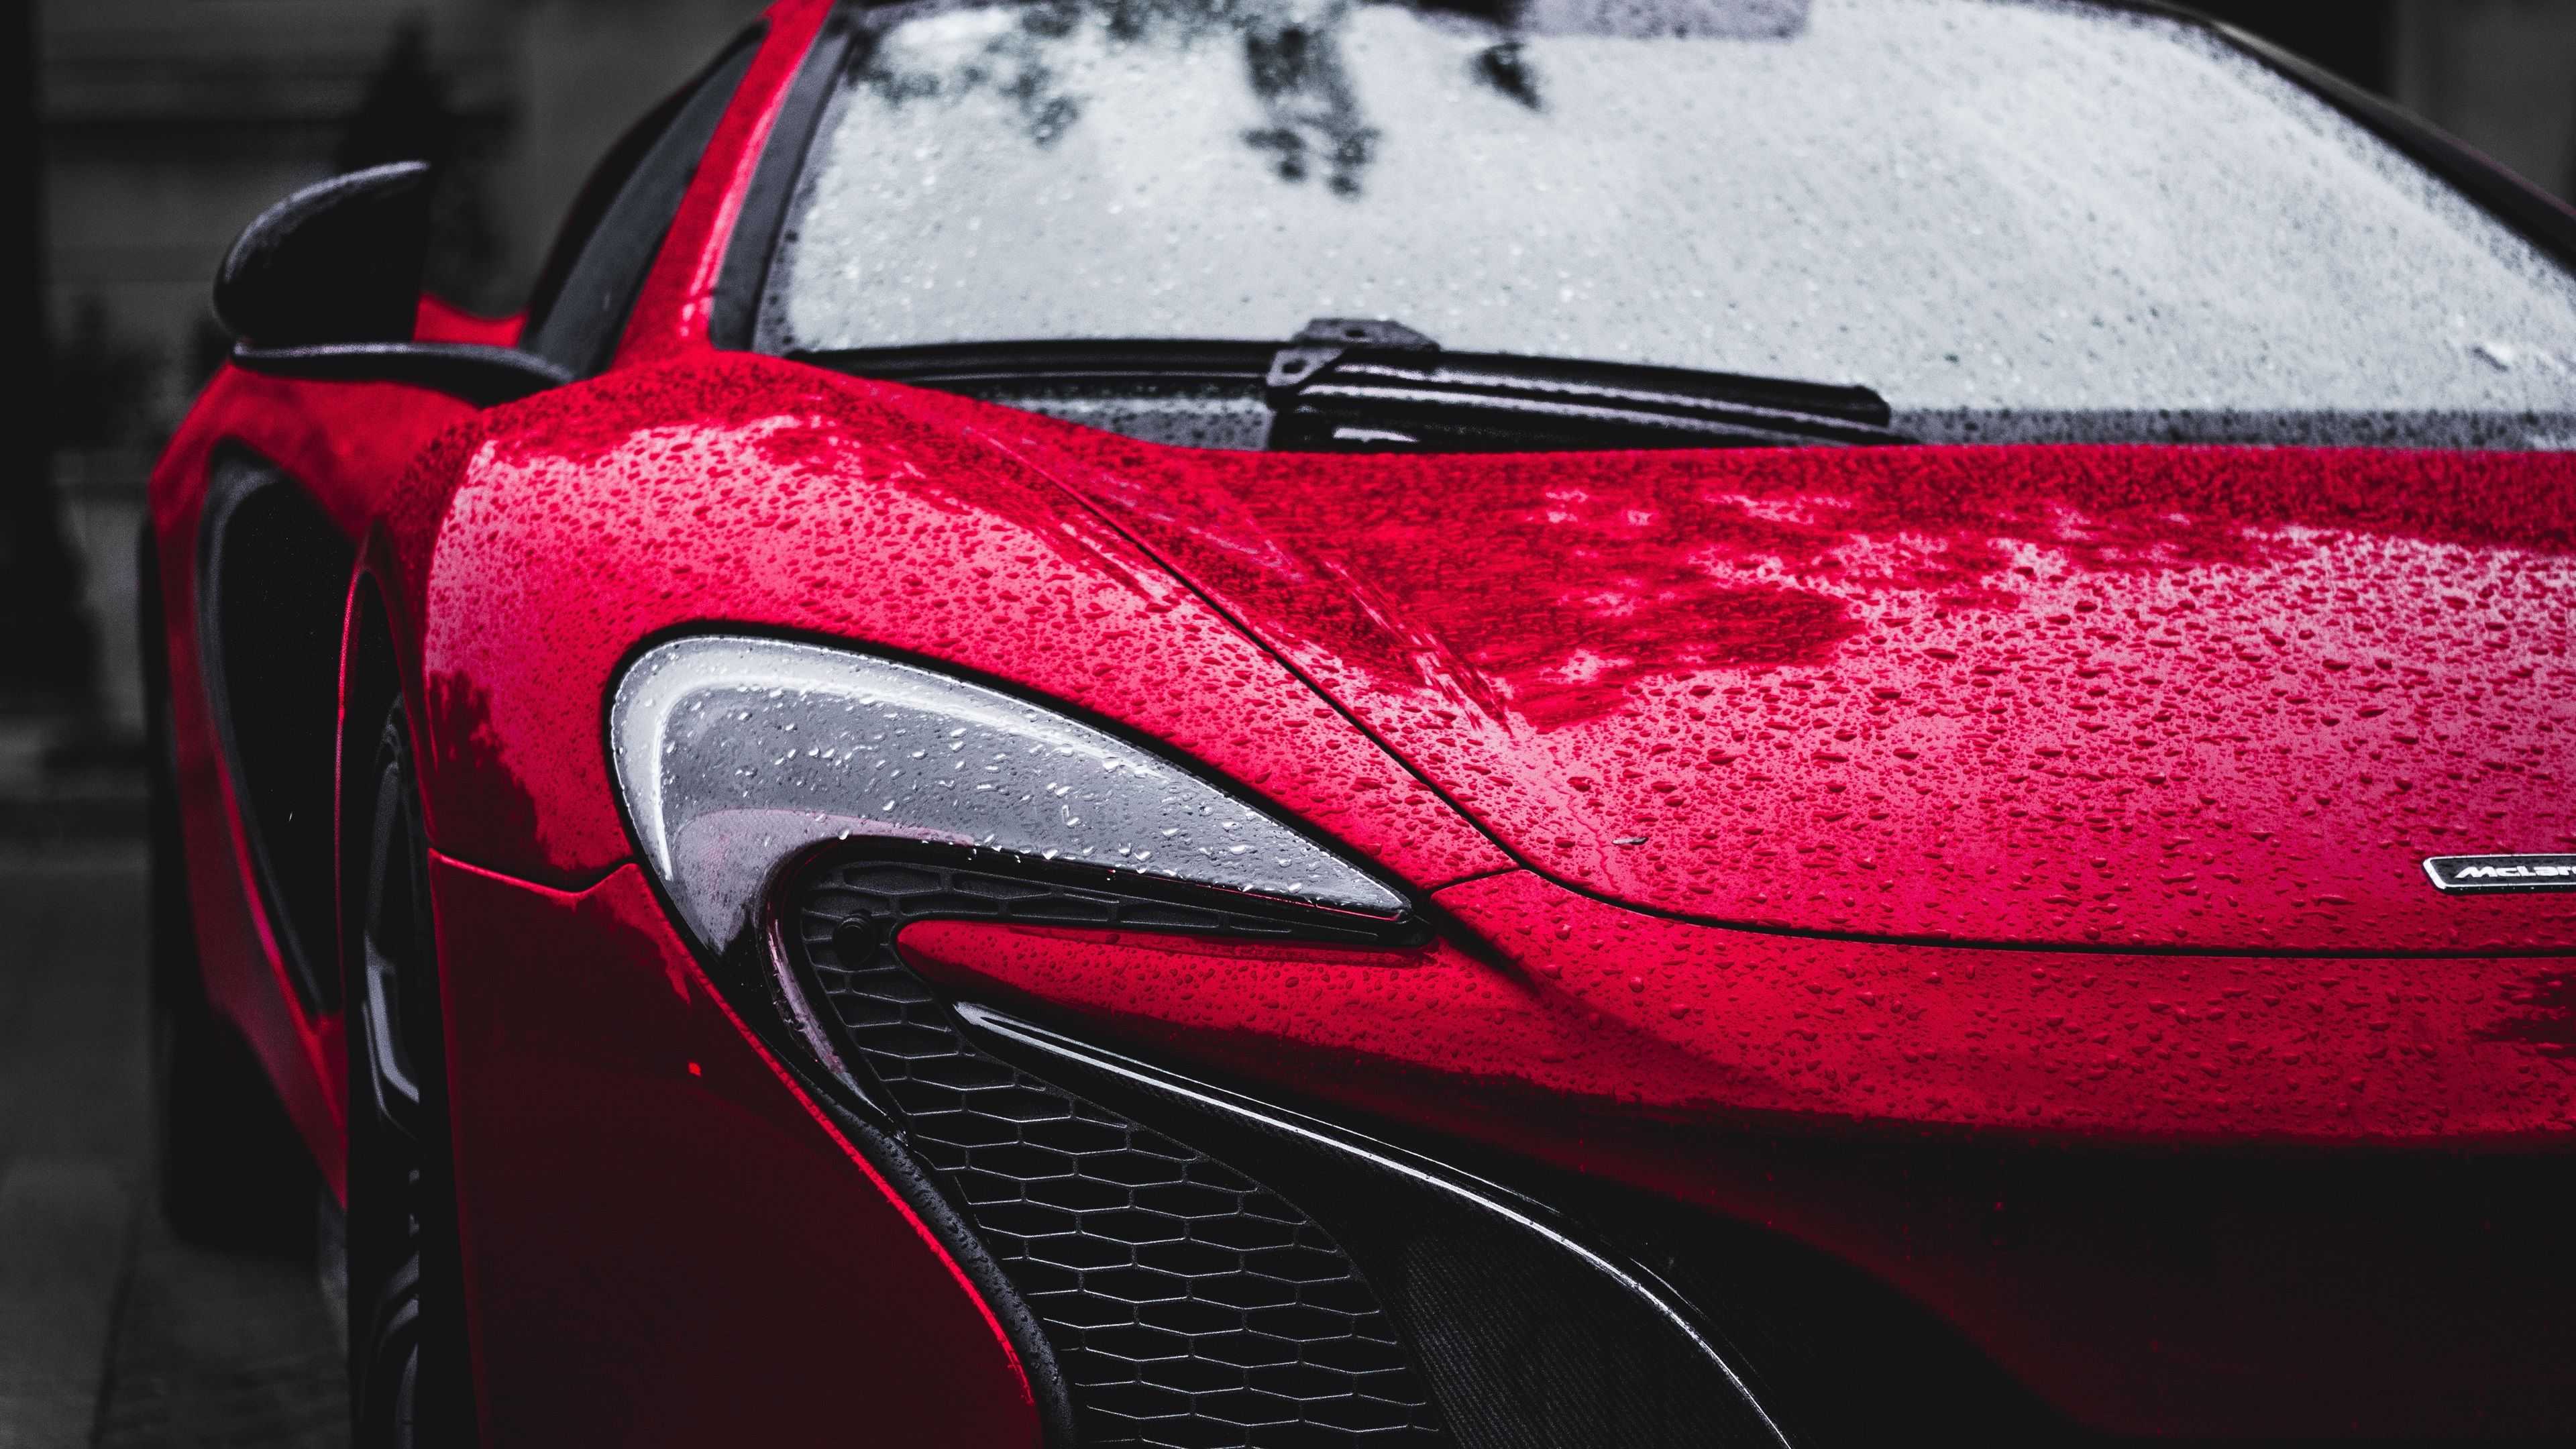 Wallpaper McLaren red car front view, headlight, after rain, water drops 3840x2160 UHD 4K Picture, Image